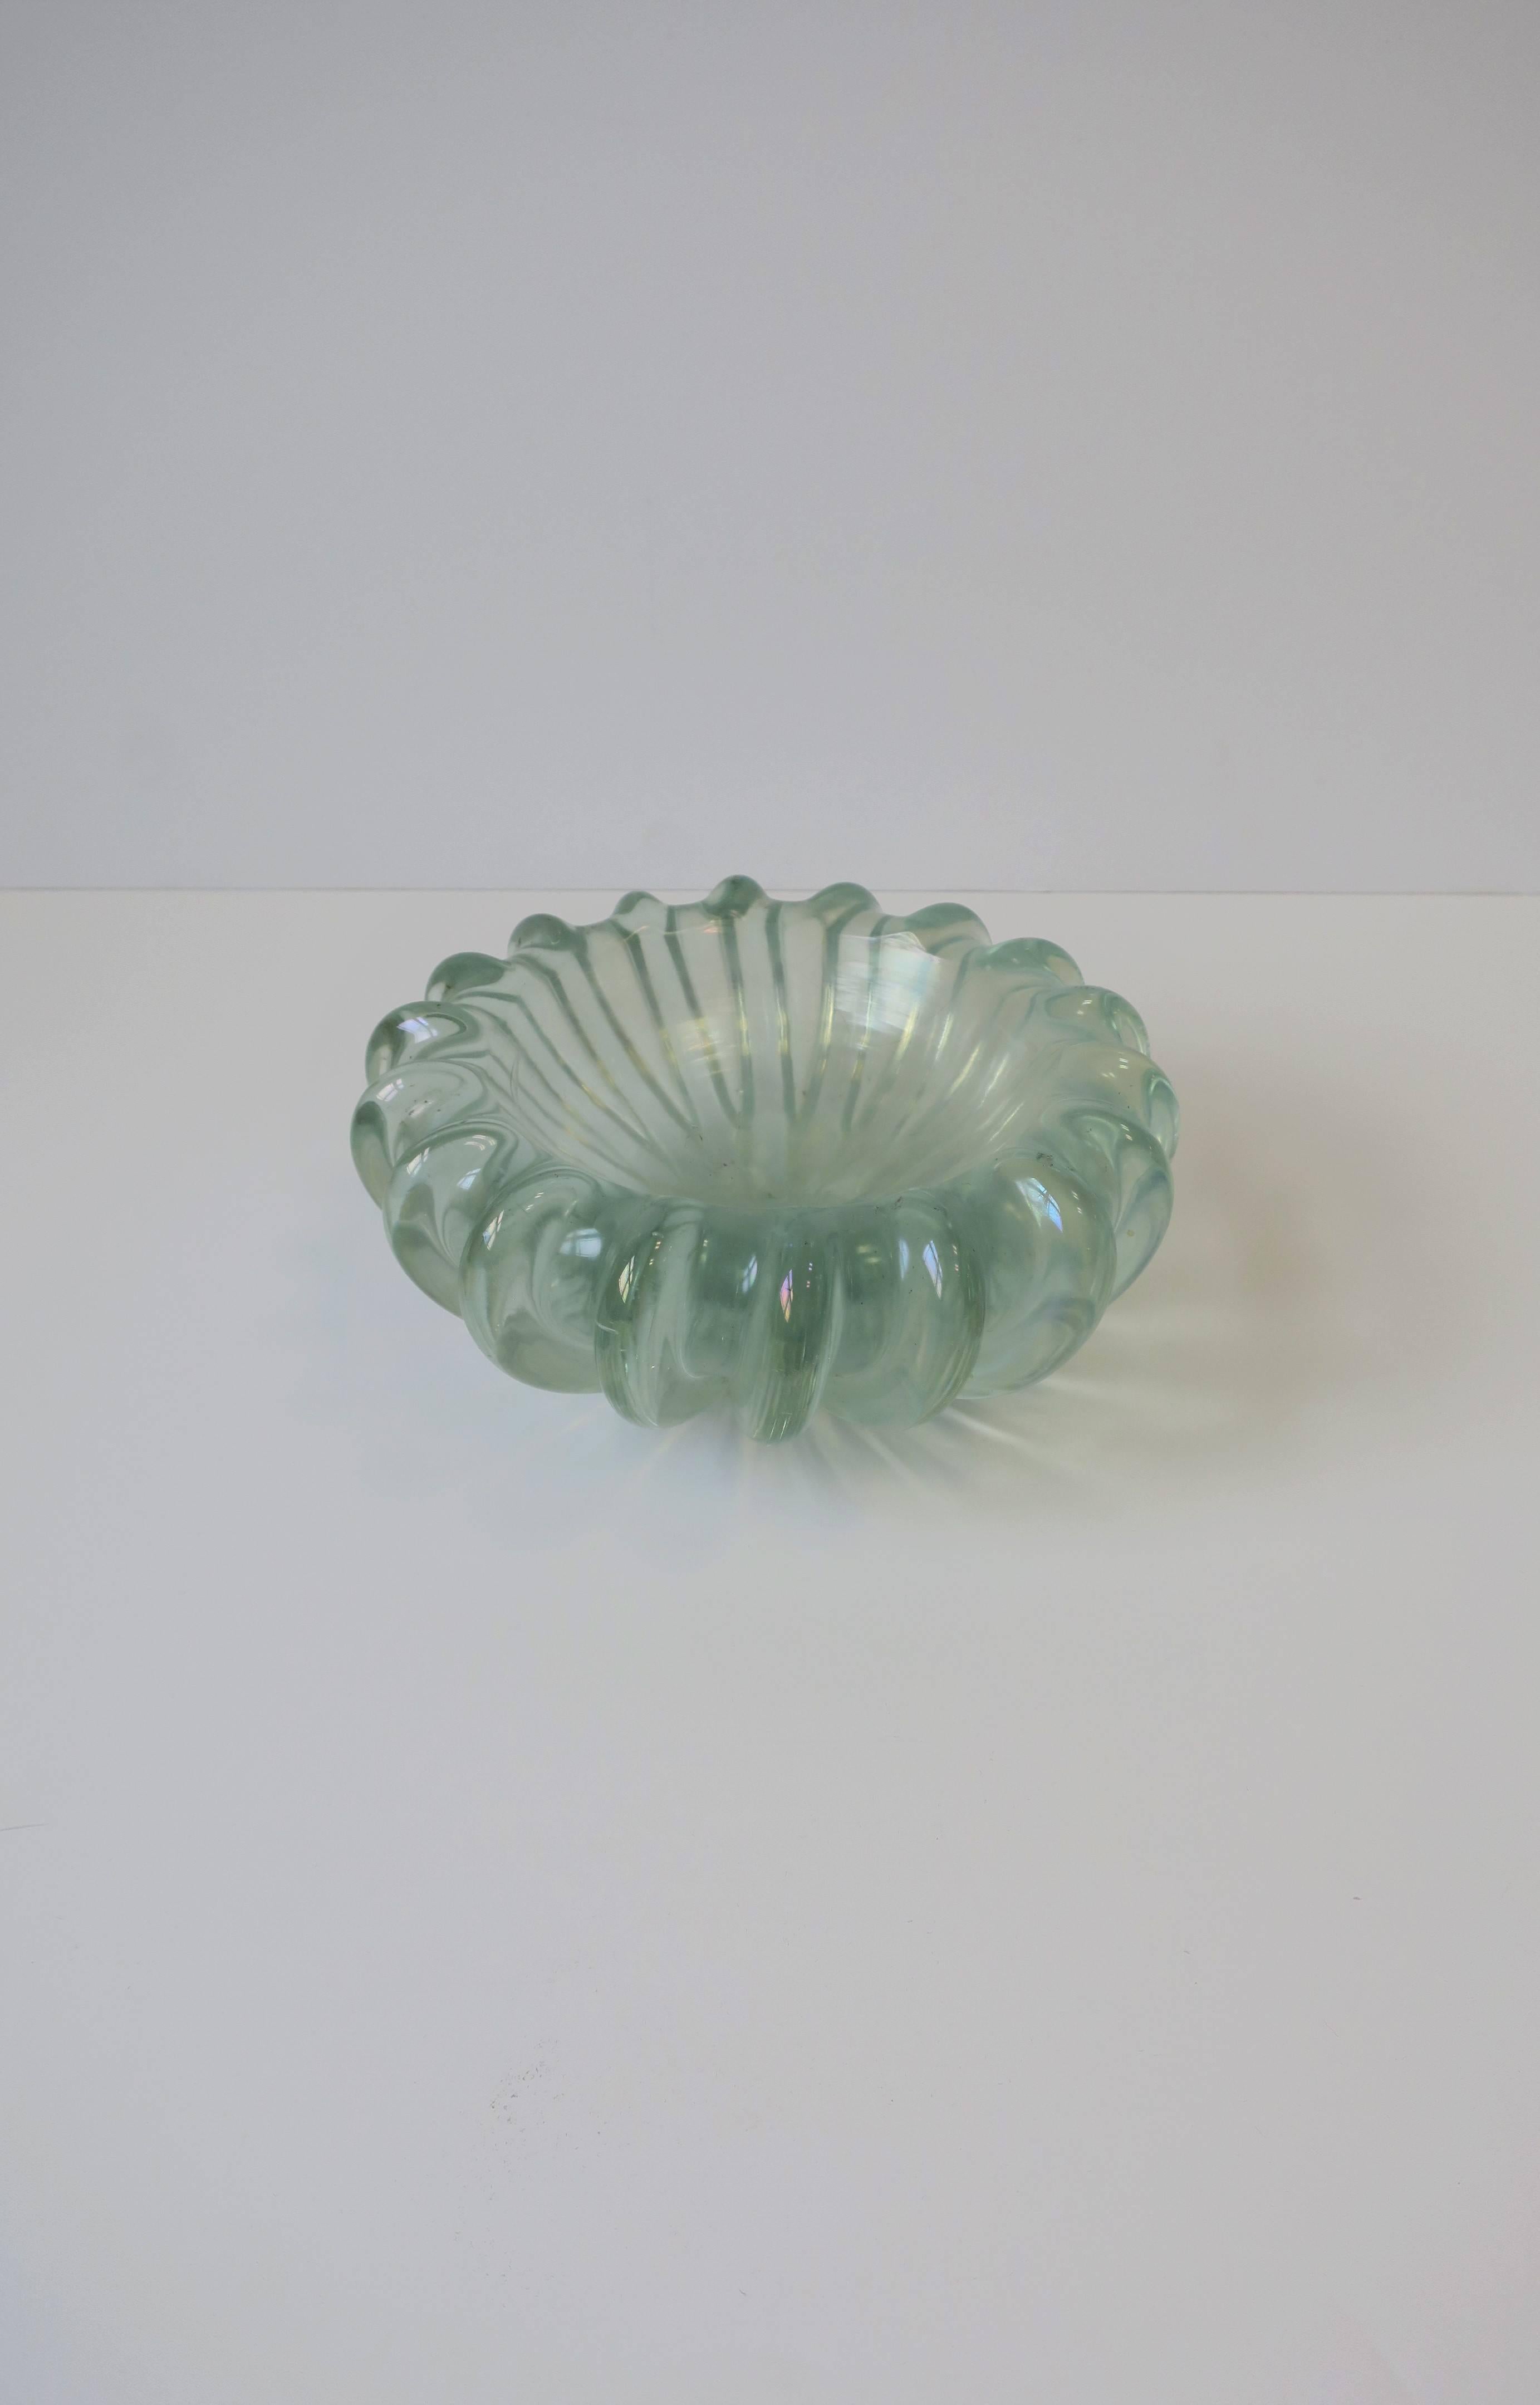 This is a very substantial and gorgeous Italian Murano iridescent art glass bowl with fluted design, circa mid-20th century, Italy. Art glass hue is a translucent light sea-foam green with a shimmer of iridescence. Bowl measures: 3.5